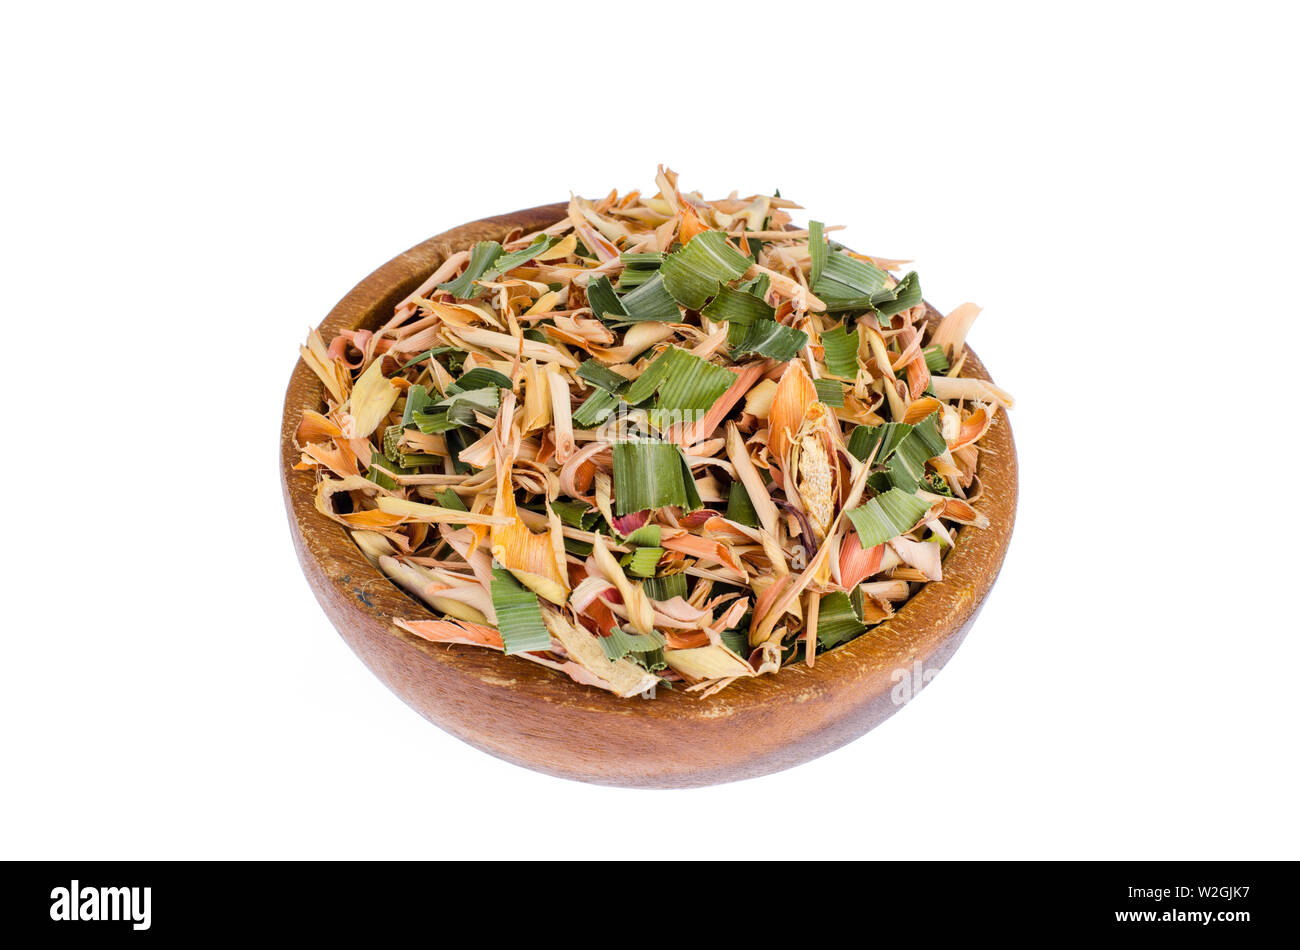 Dried lemongrass leaves in wooden bowl.  Stock Photo